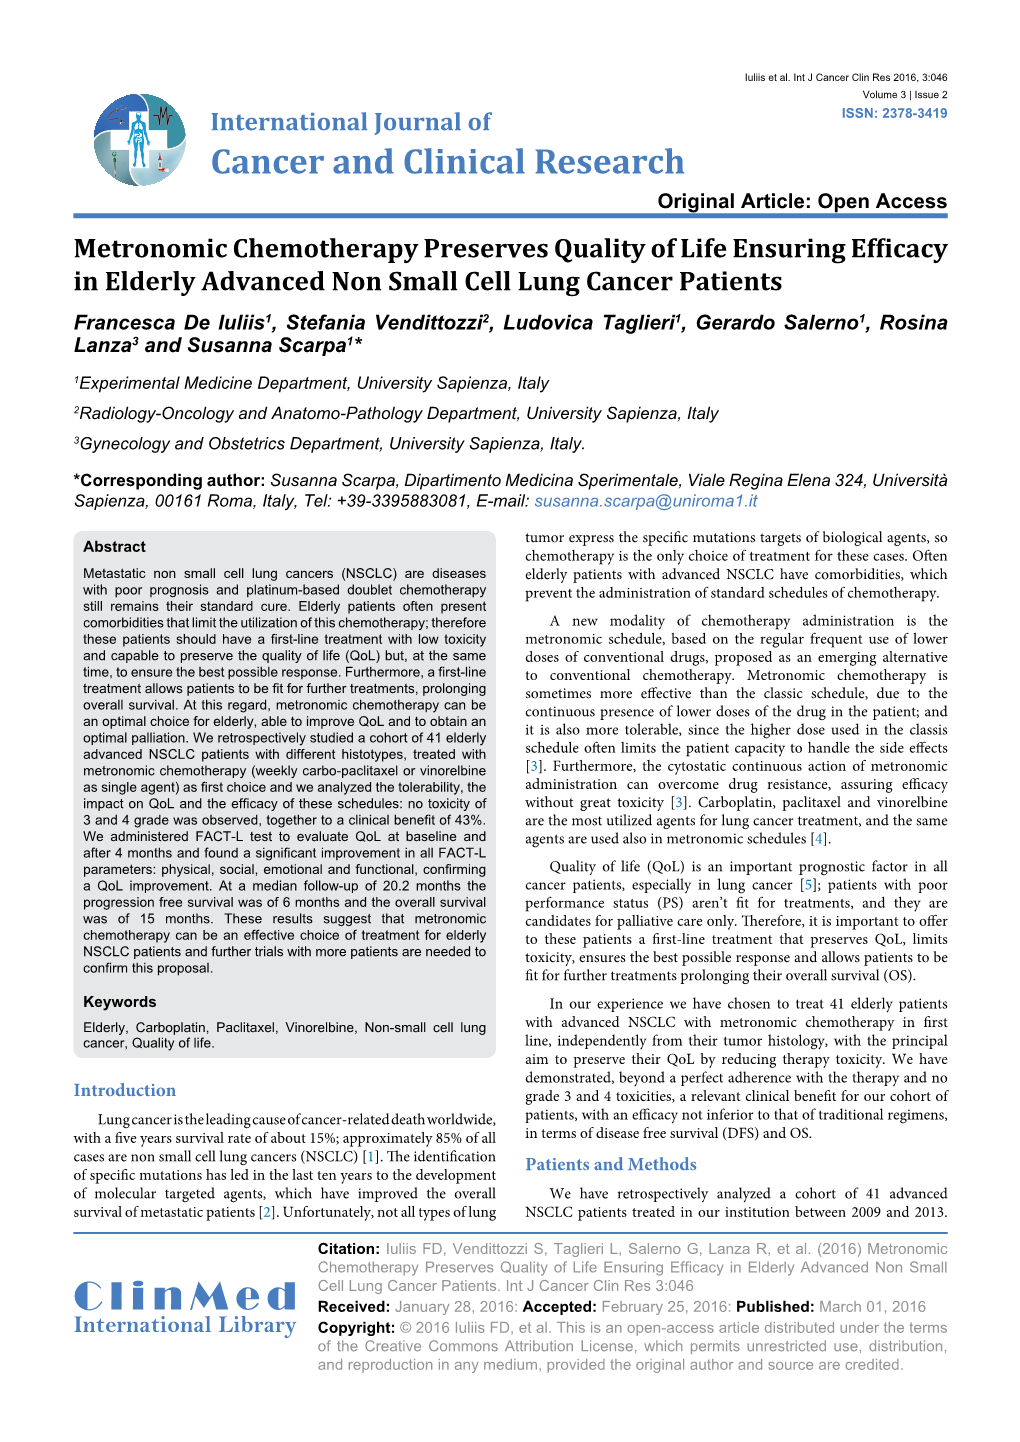 Metronomic Chemotherapy Preserves Quality of Life Ensuring Efficacy in Elderly Advanced Non Small Cell Lung Cancer Patients